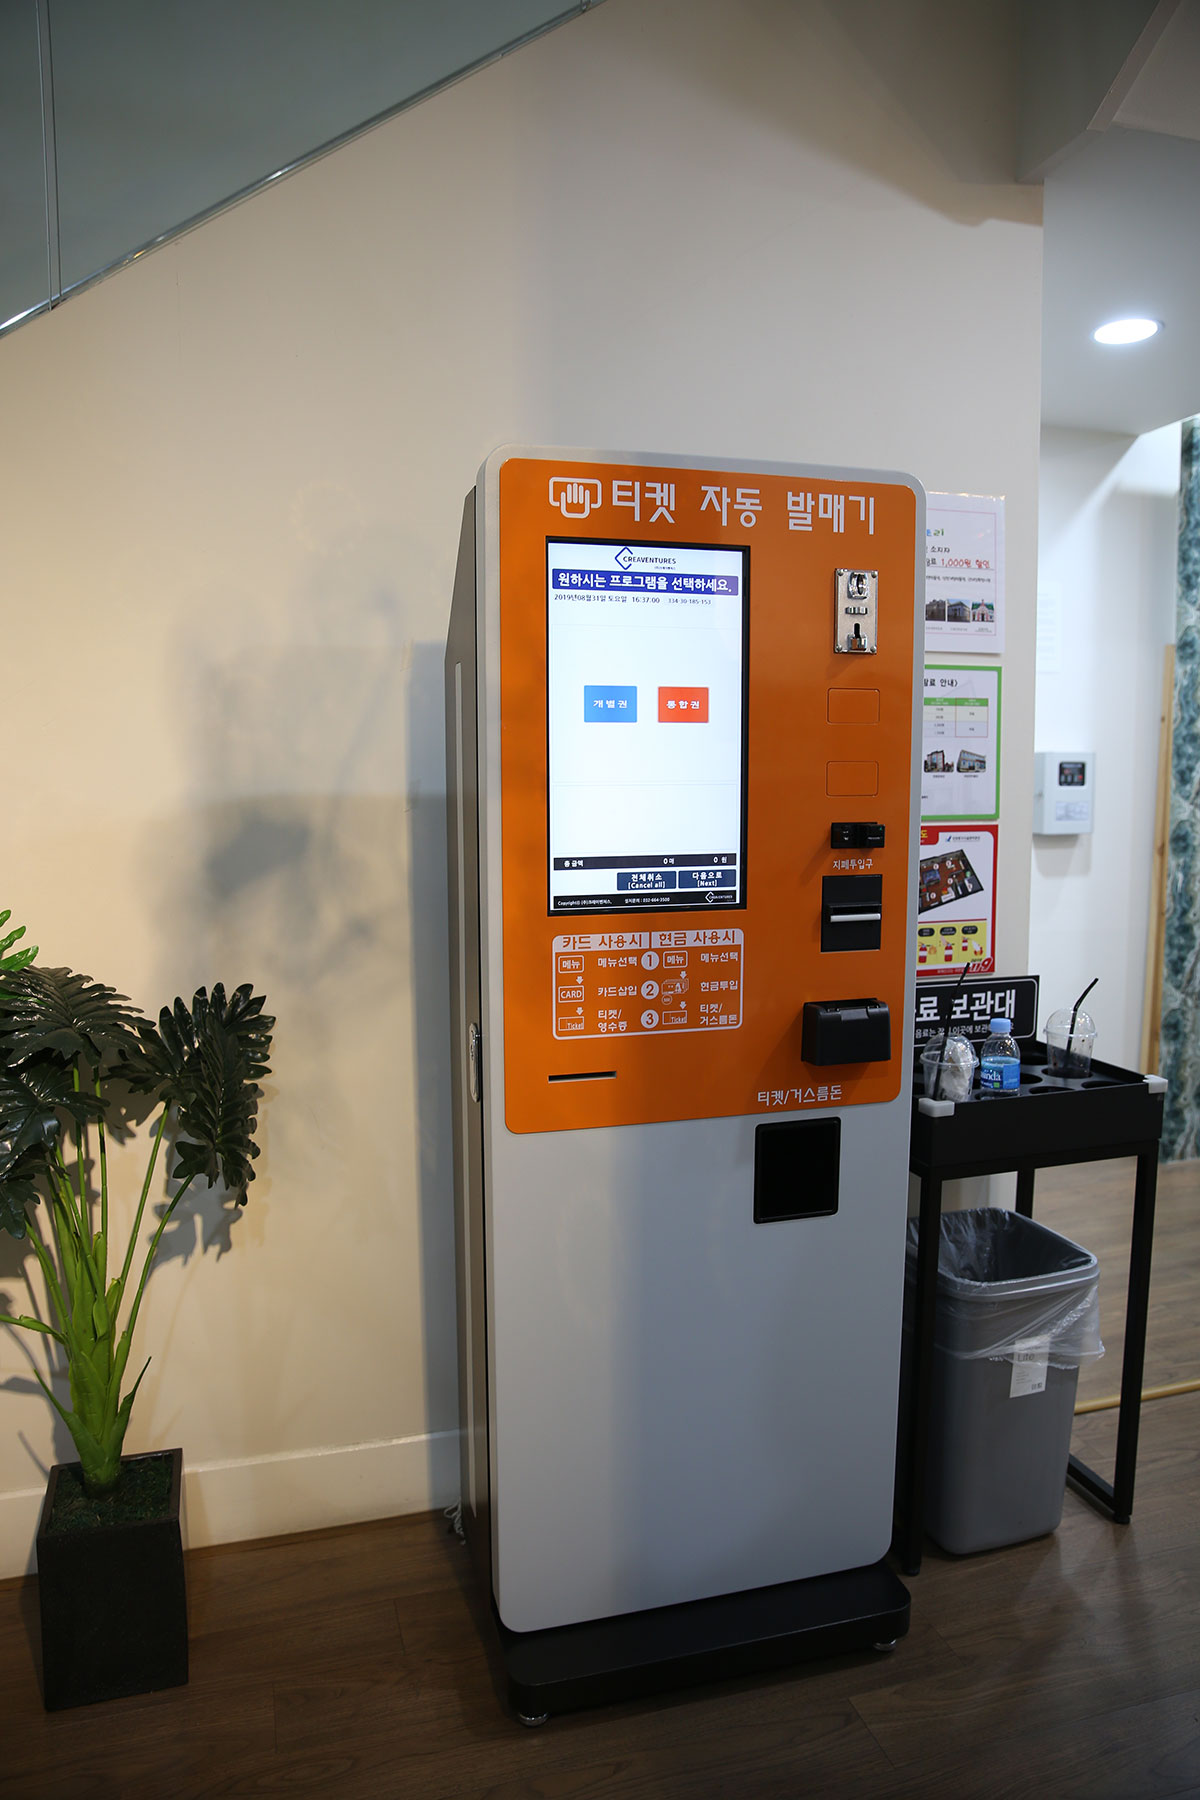 Kiosk to buy a package ticket for 5 museums